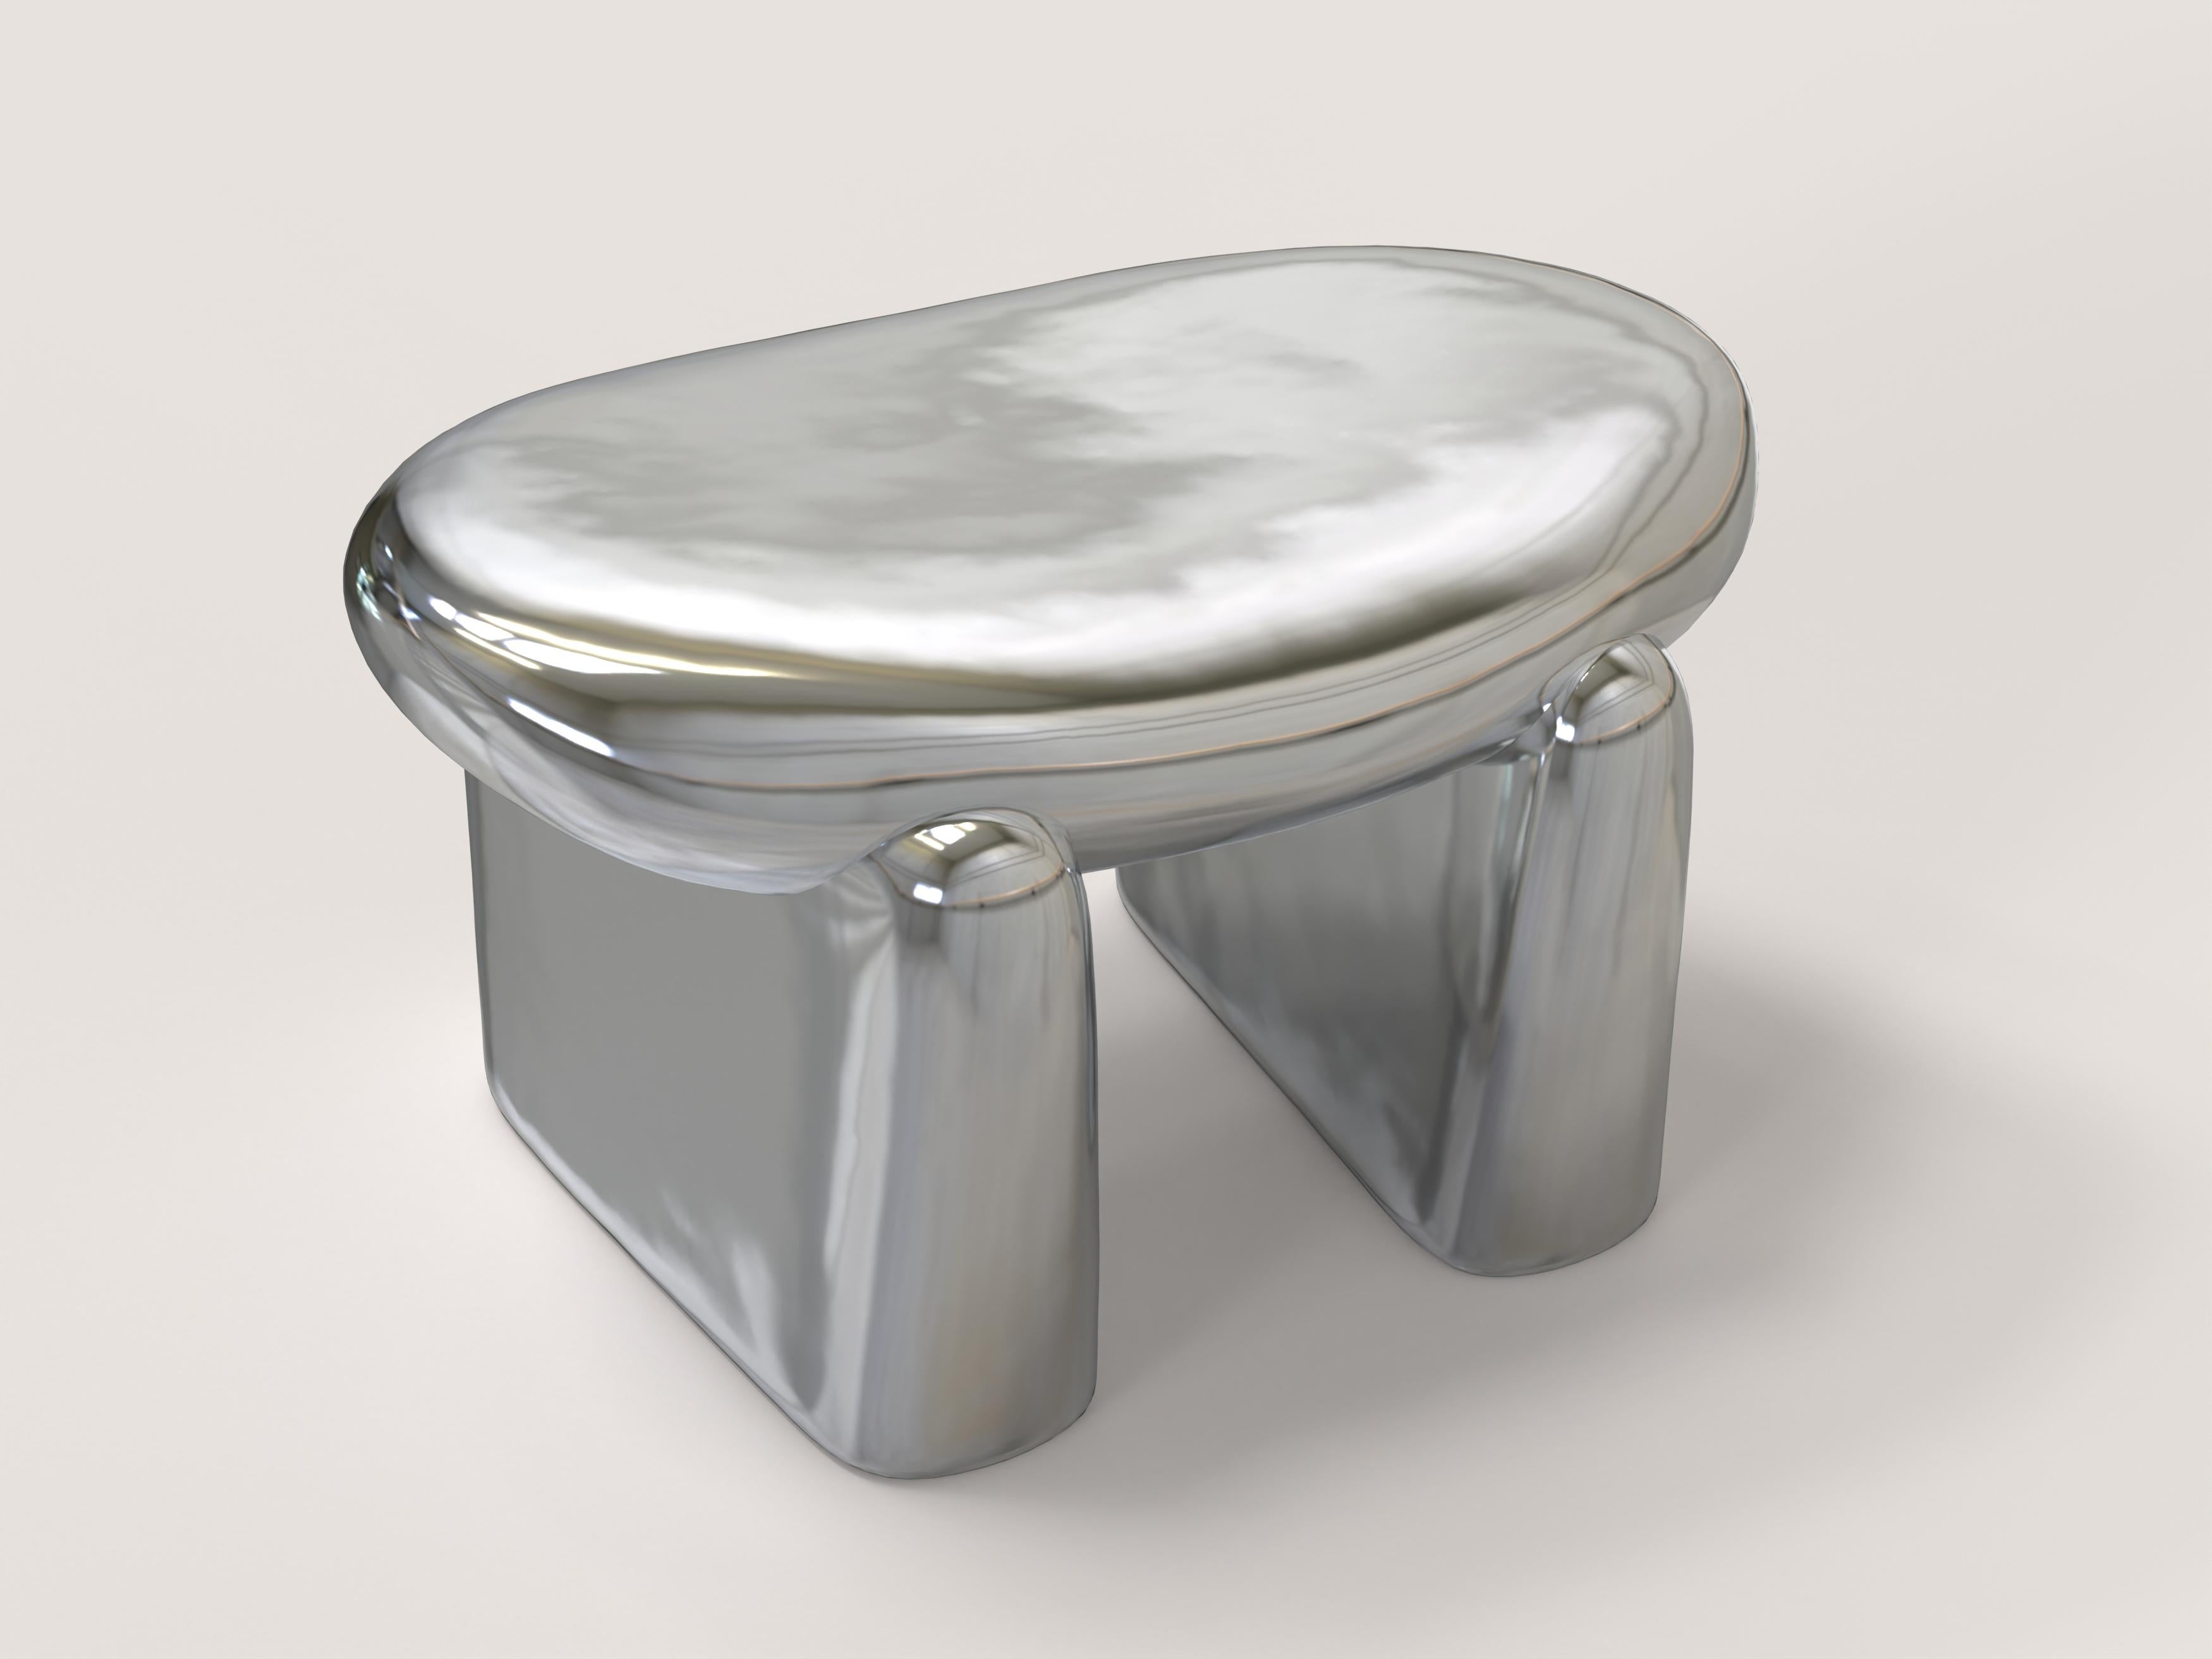 Painted Contemporary Limited Edition Signed Stool, Pau Silver V2 by Edizione Limitata For Sale